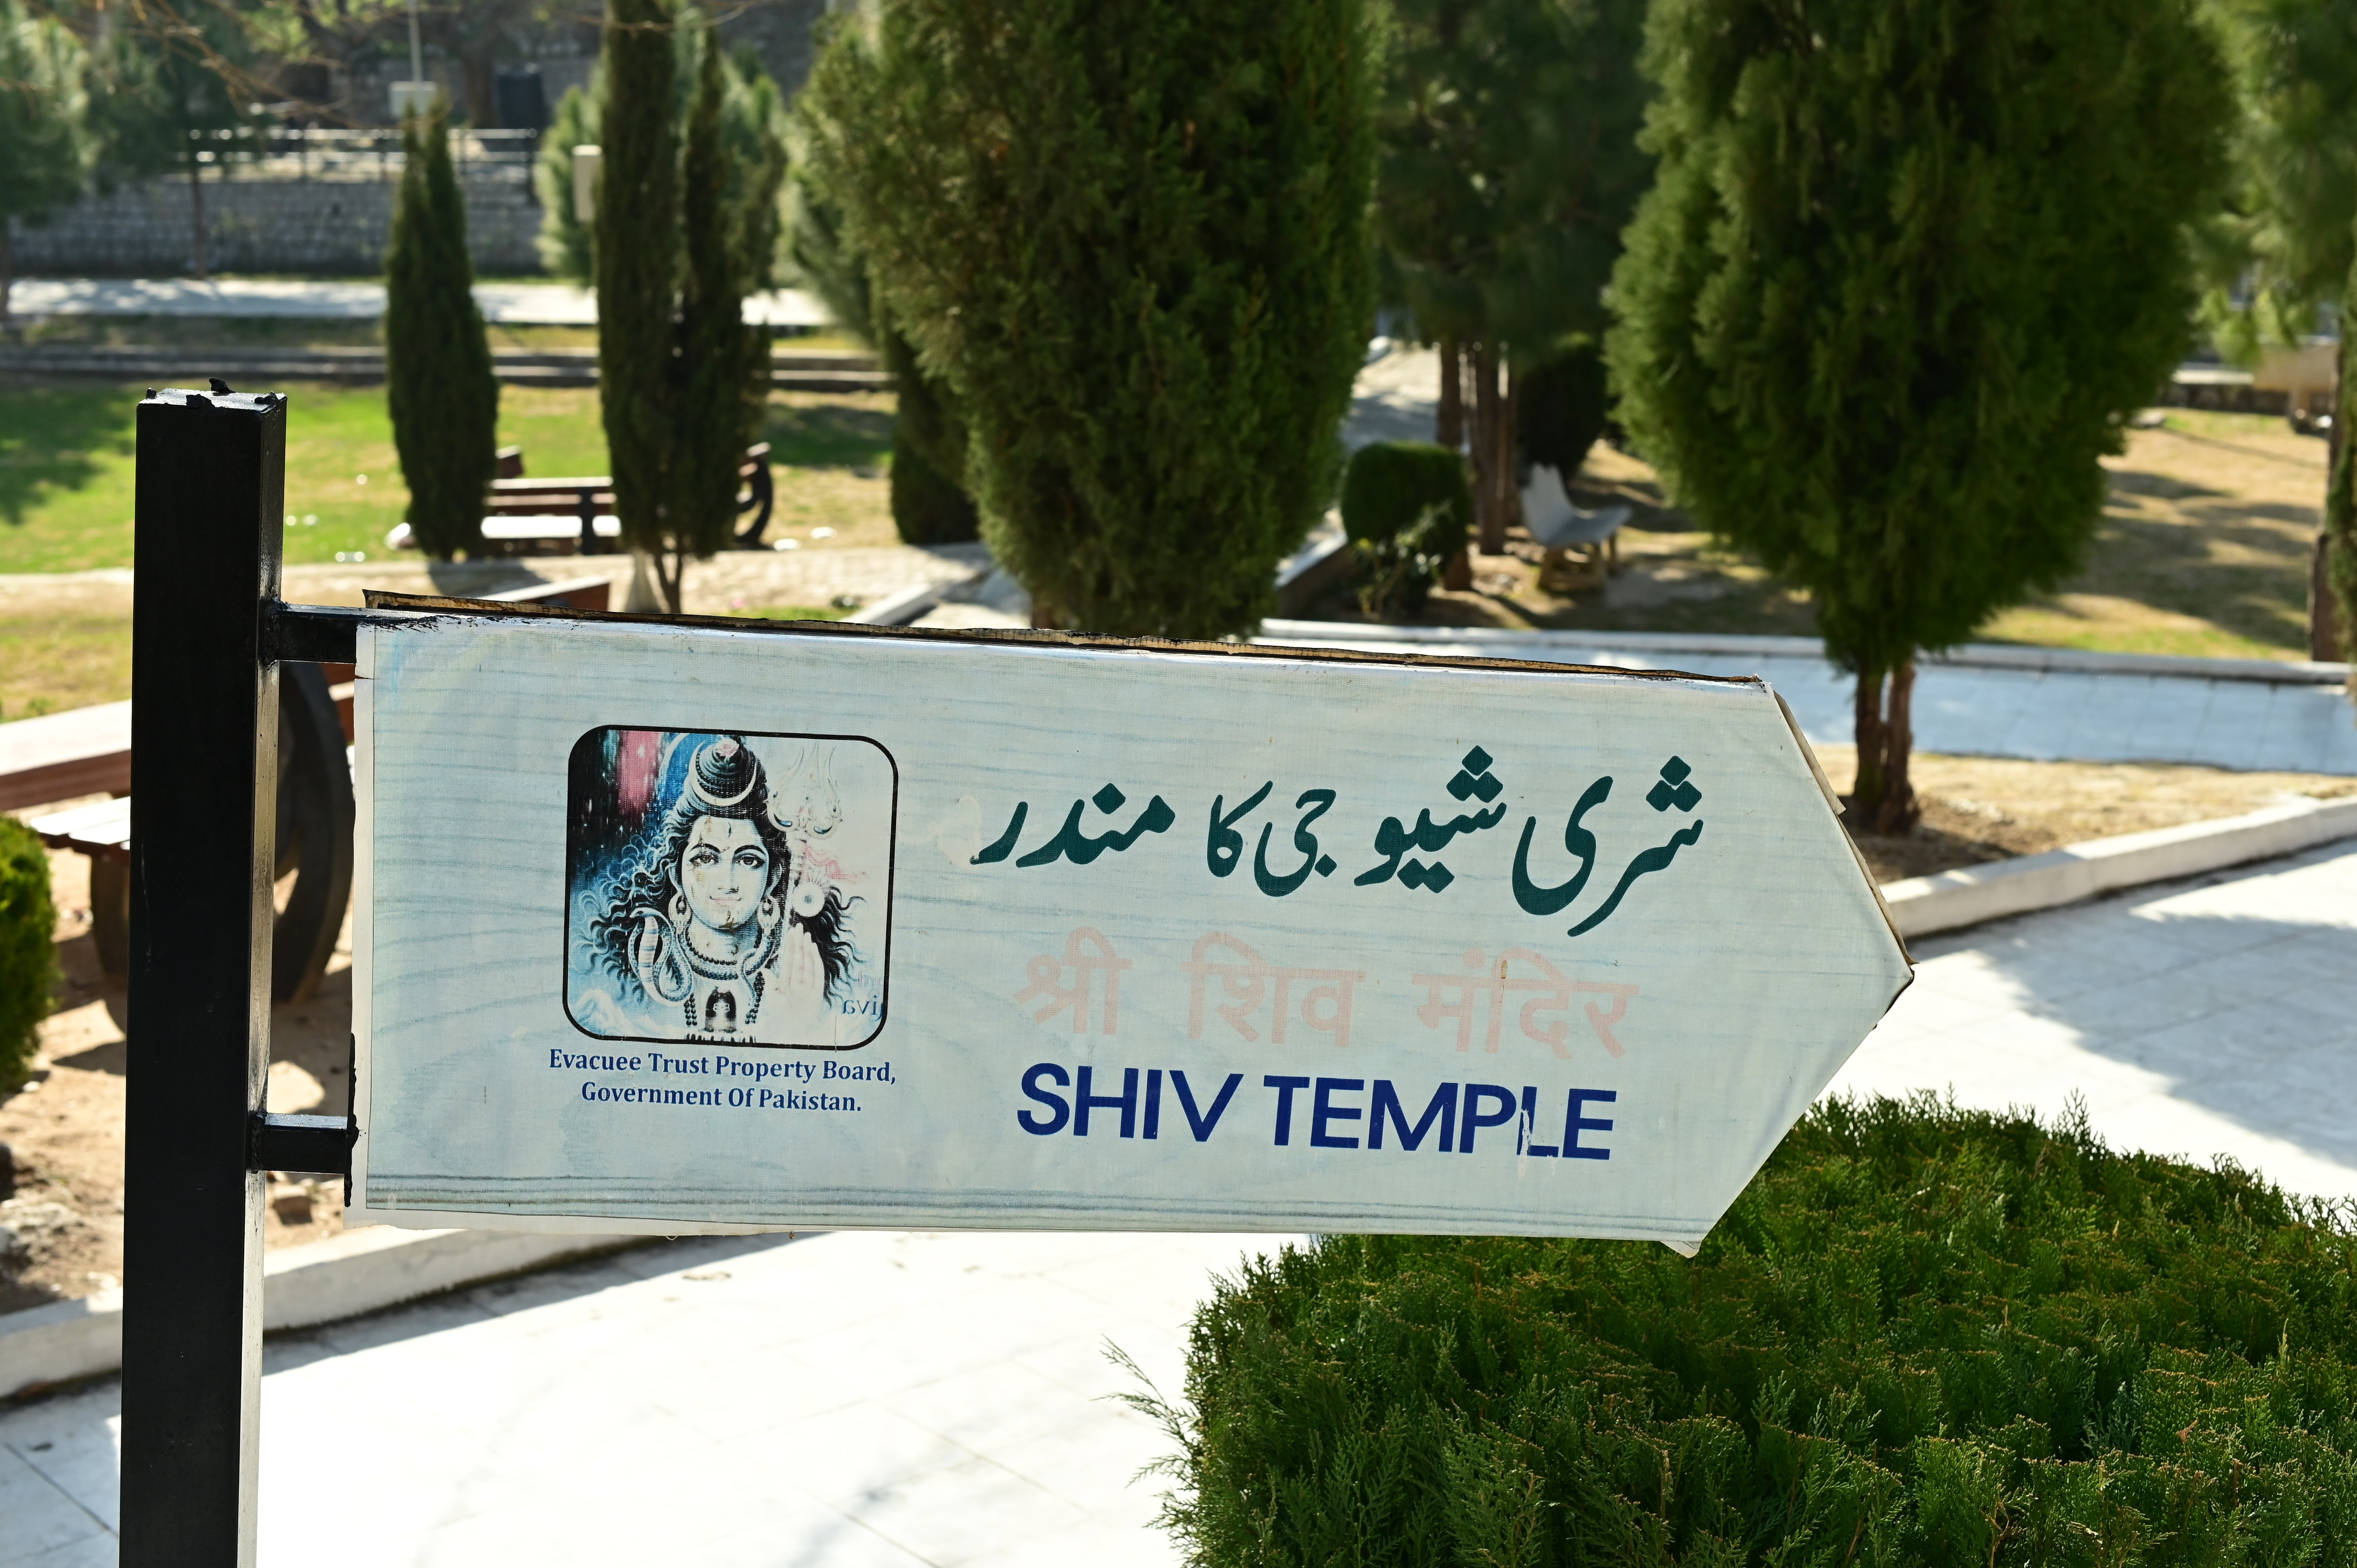 The Direction board indicating the location of Shiv Temple